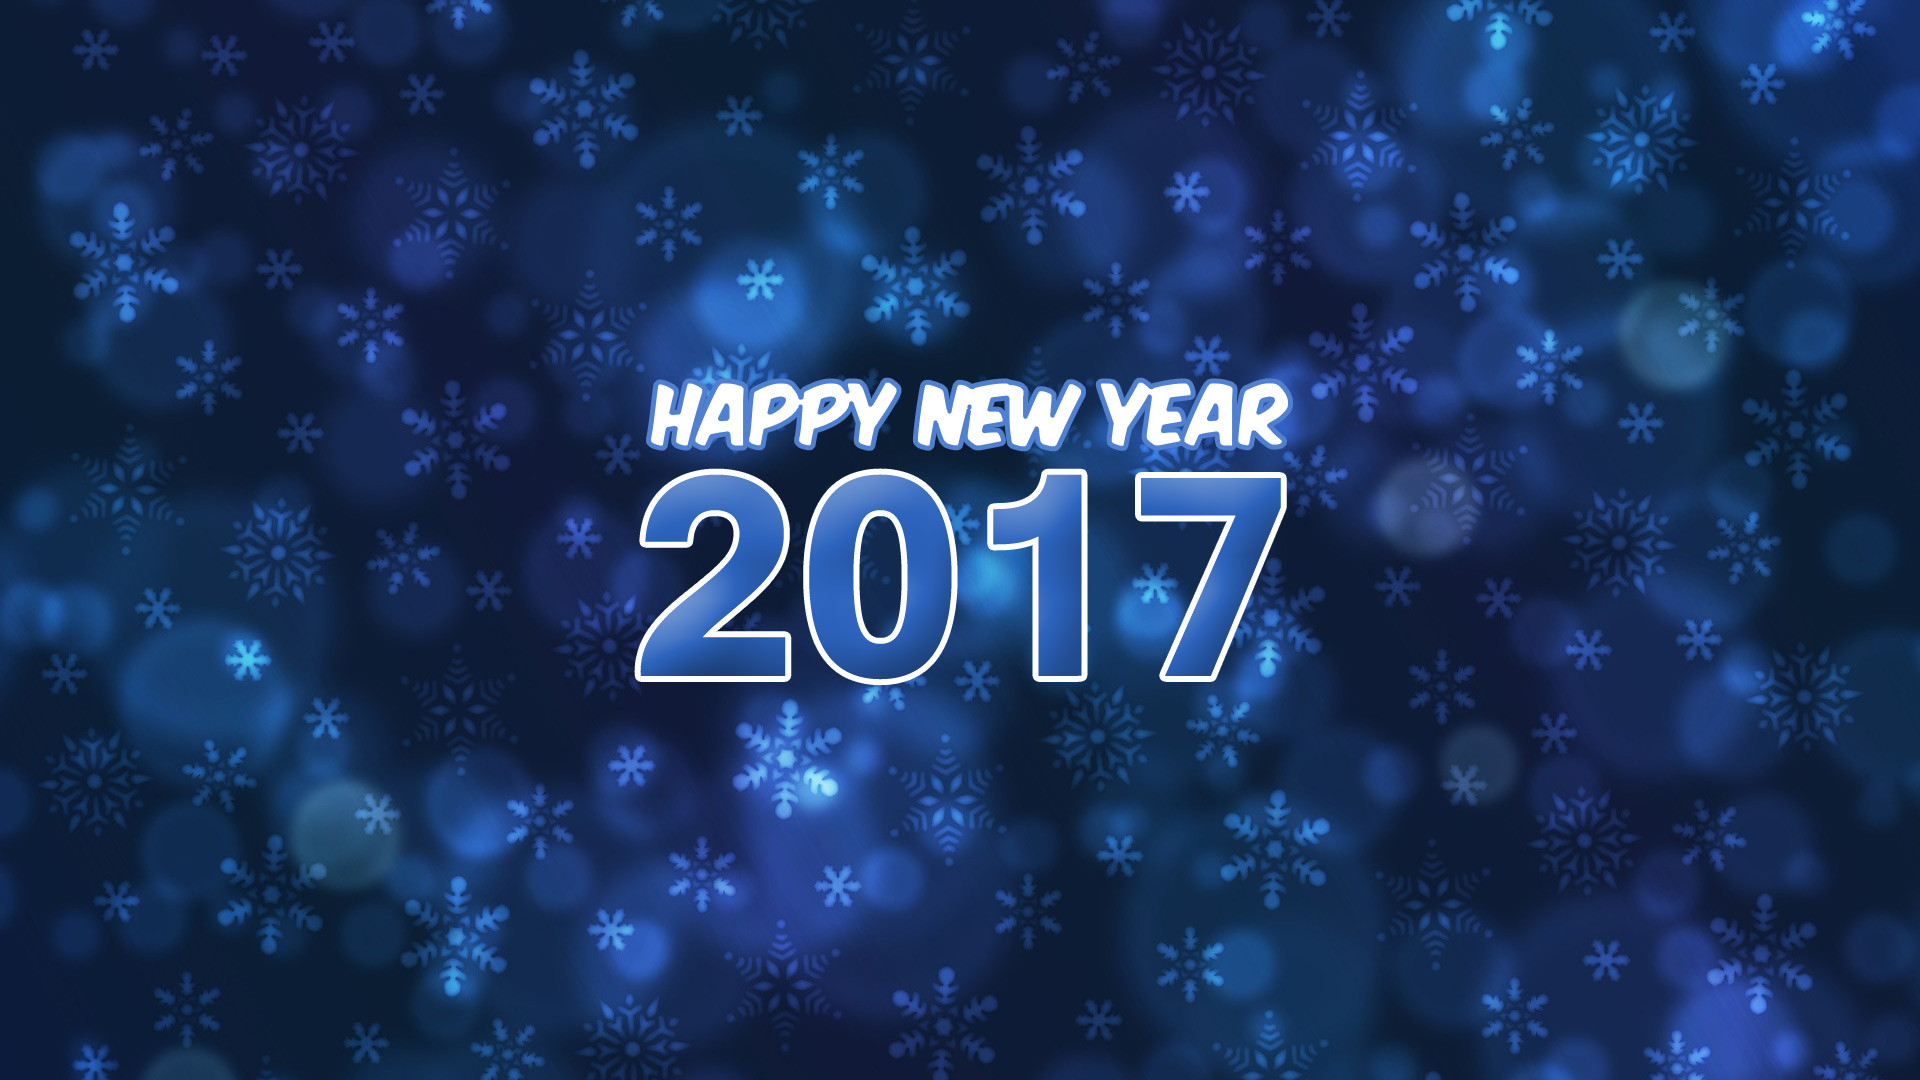 1920x1080 ... Happy New Year 2018 Wallpapers | HD Wallpapers, Gifs, Backgrounds .